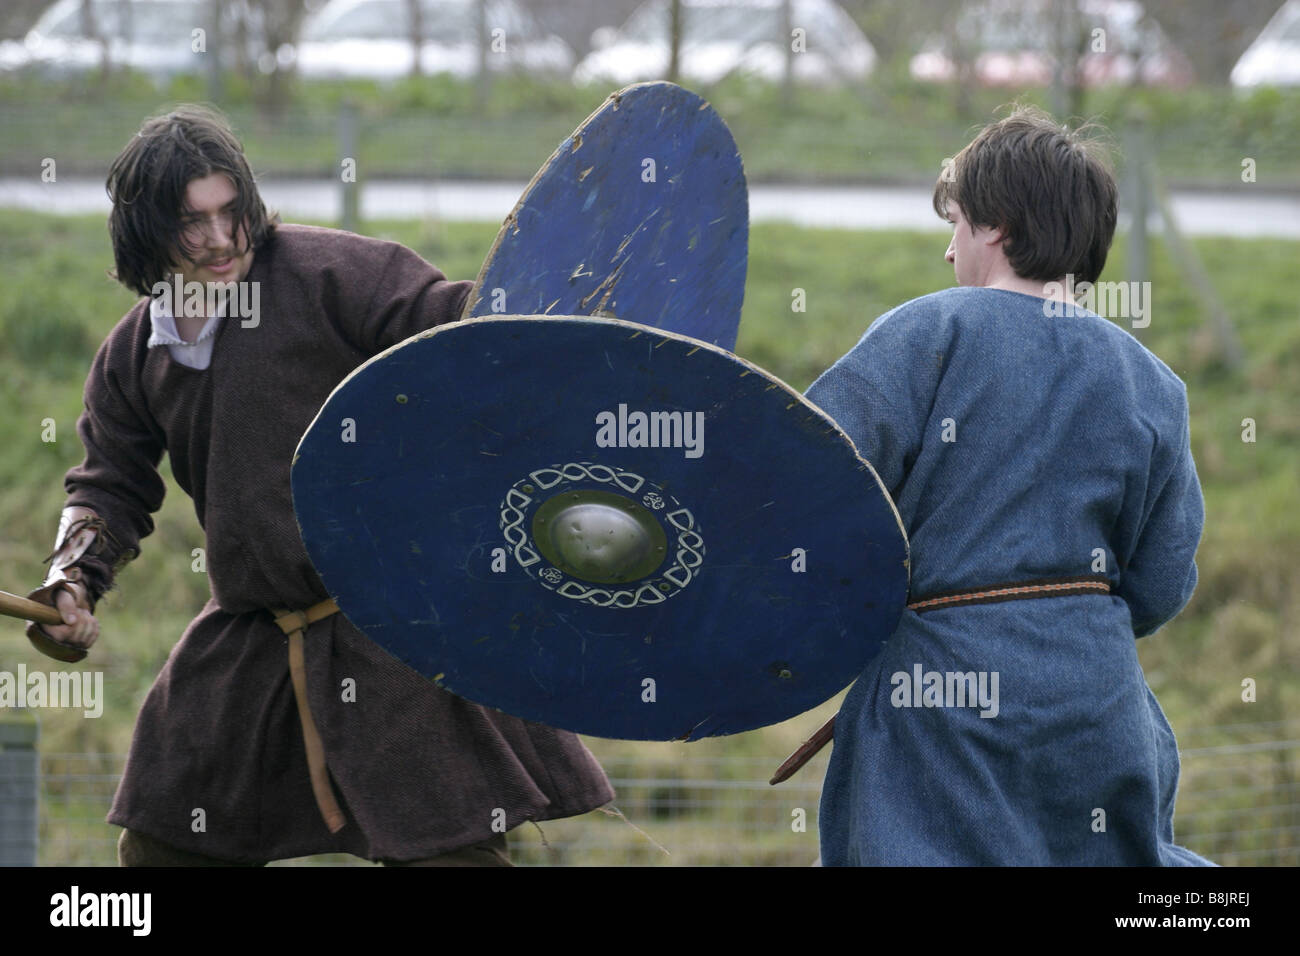 iron age reinactor role players in costume battle shields axes Stock Photo